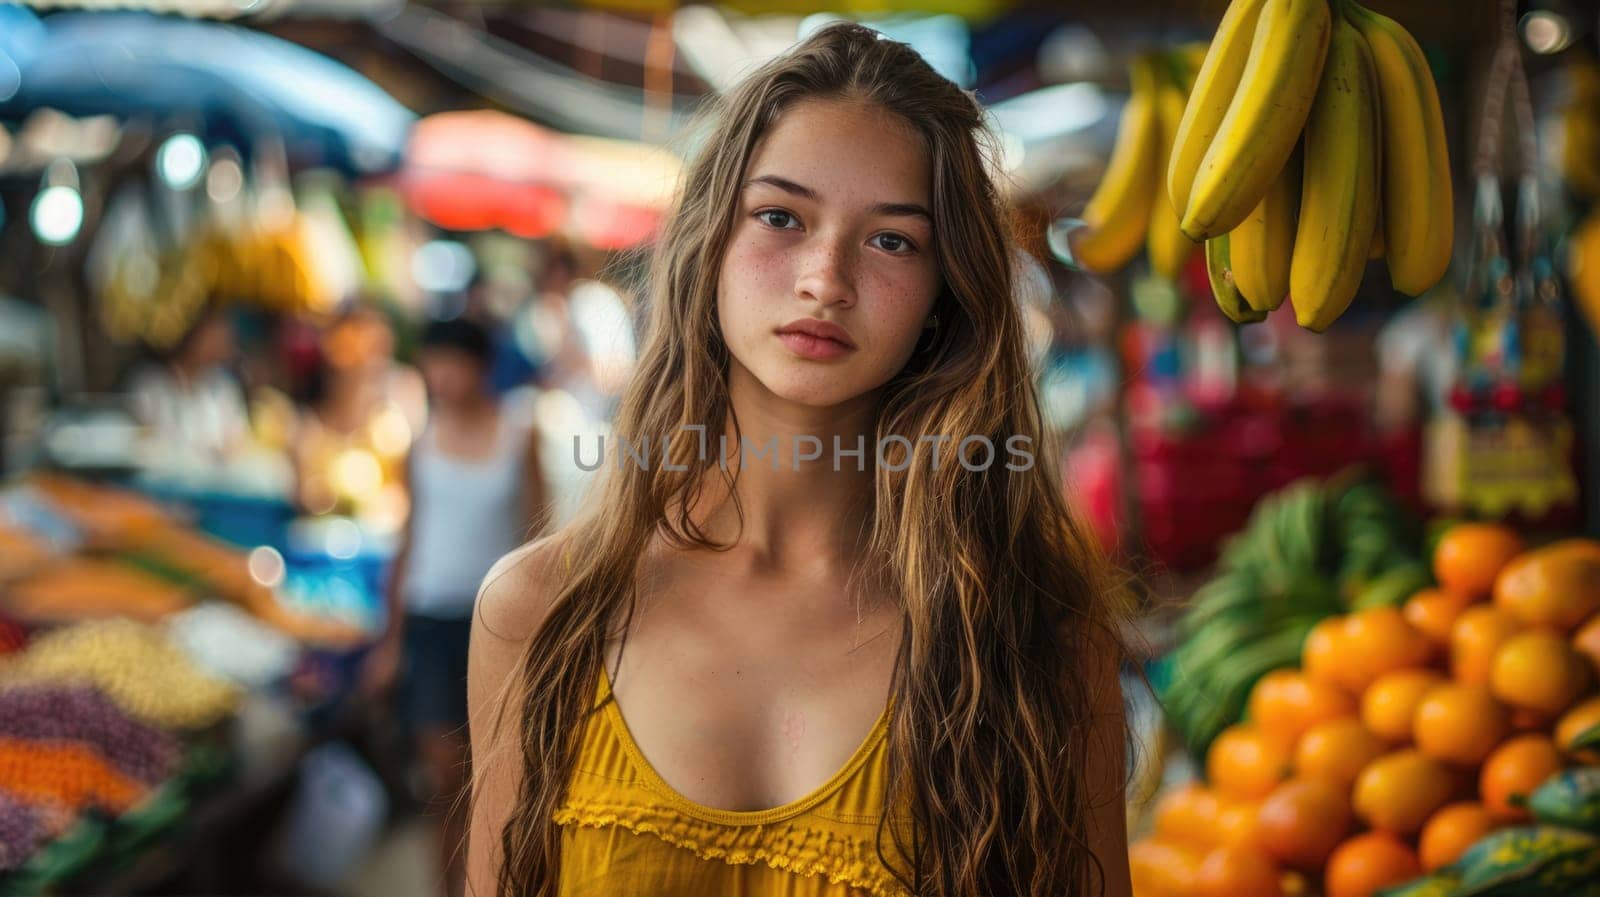 European girl against the backdrop of colorful market stalls by natali_brill